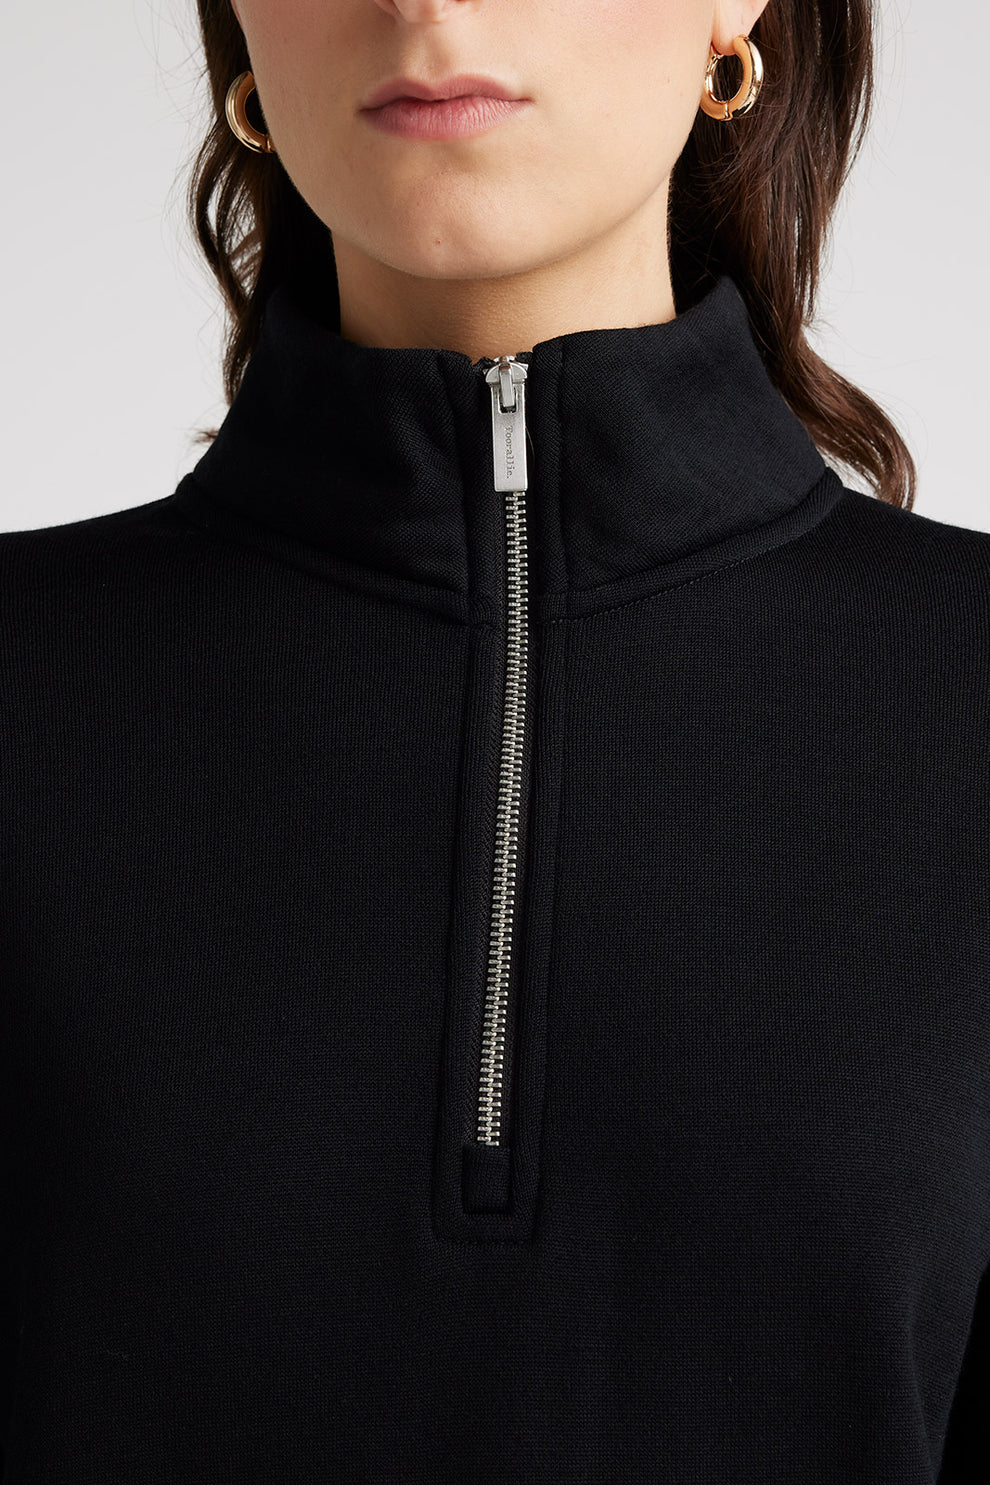 "Wrap yourself in warmth and sophistication with our black Merino wool zip collar sweater. Timeless elegance awaits."